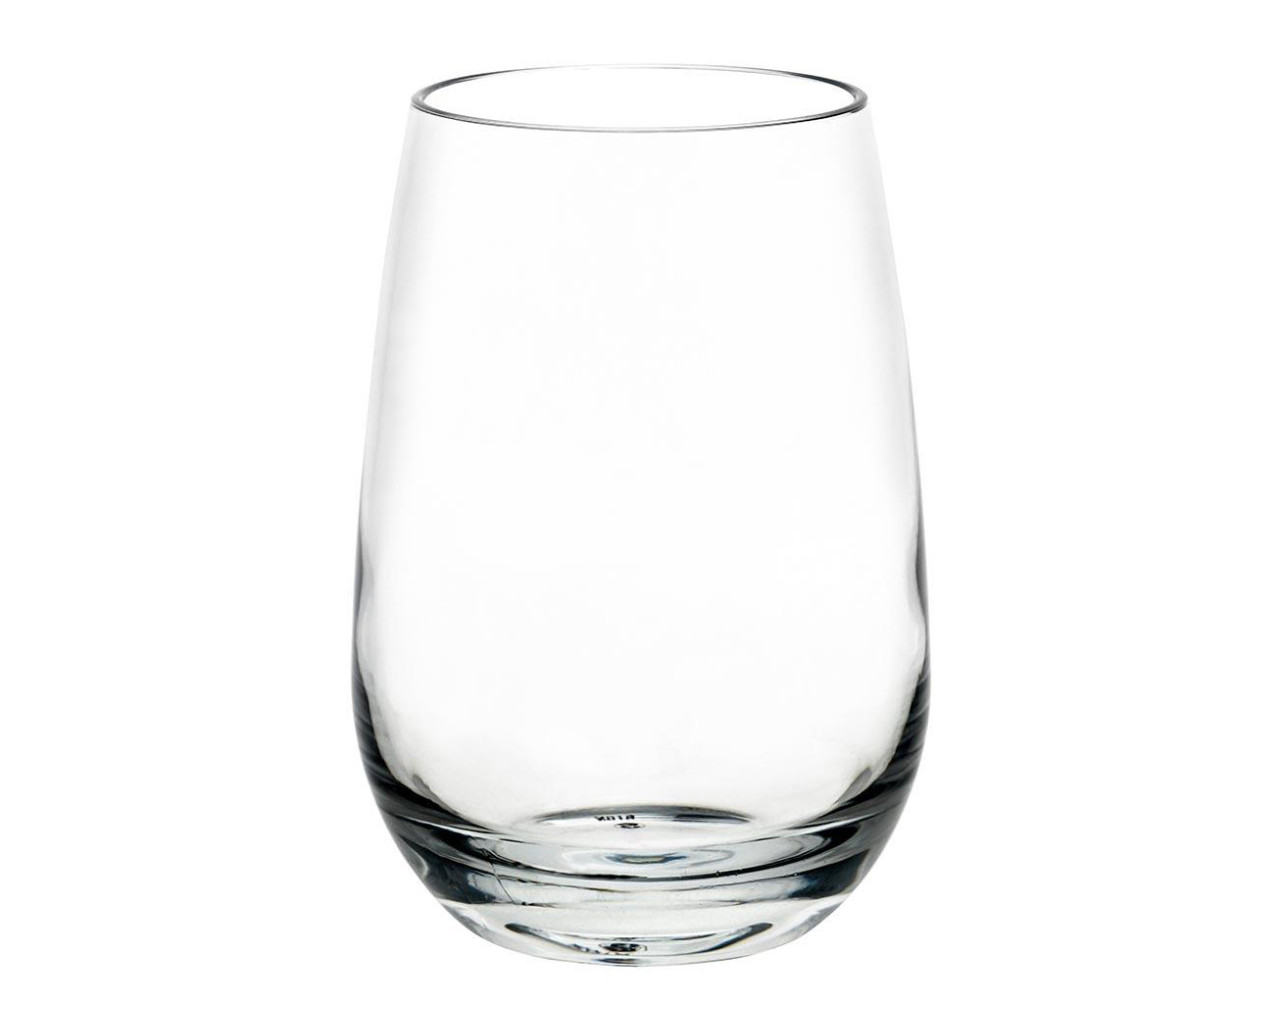 D-Still Unbreakable Polycarbonate Stemless Wine Glass 480ml - 4 Pack, , hi-res image number null